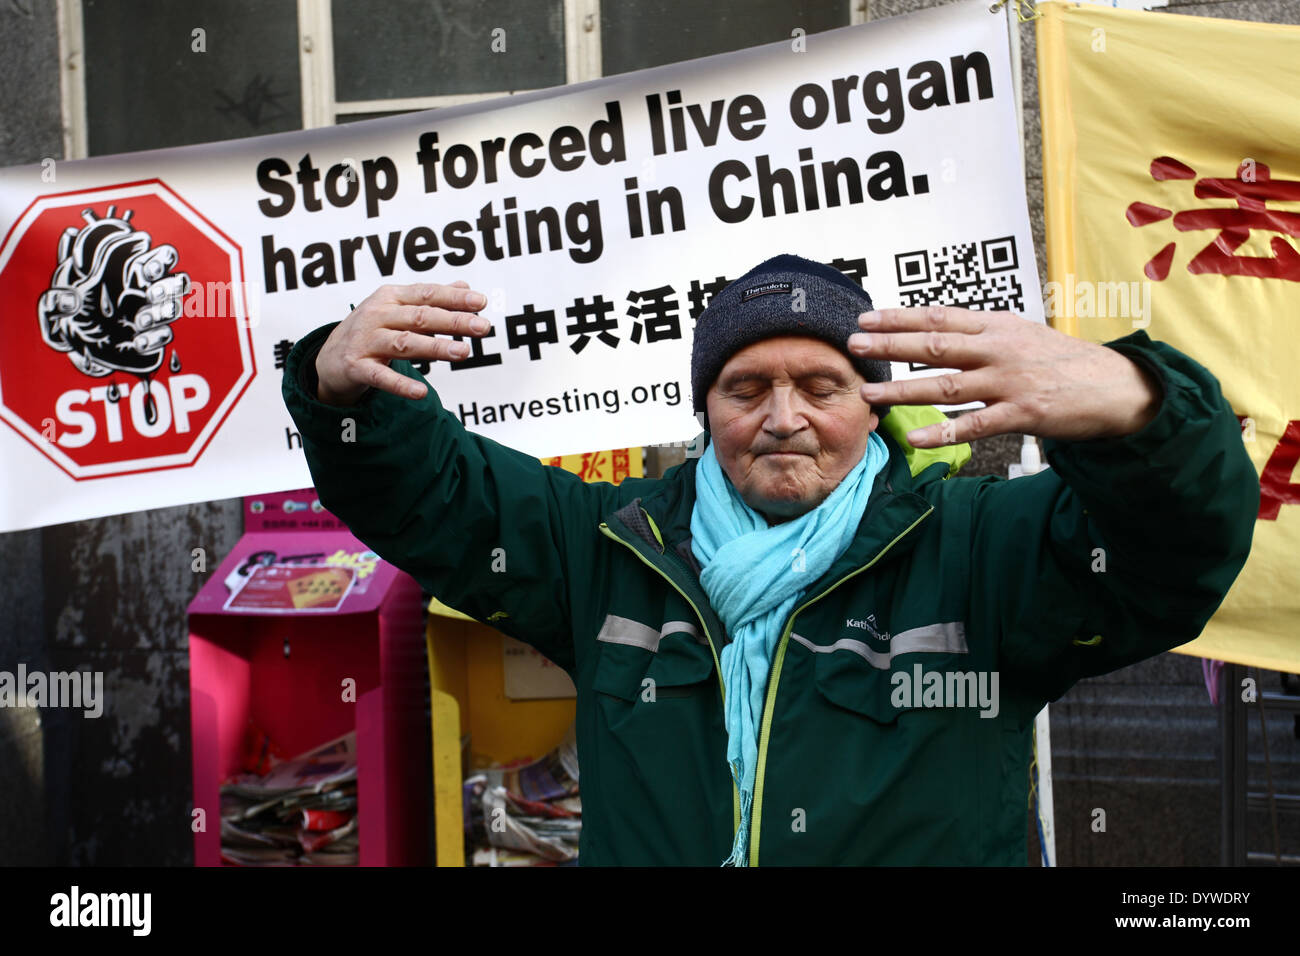 A man practicing Falun Gong during the protest against persecution of Falun Gong followers in China Stock Photo